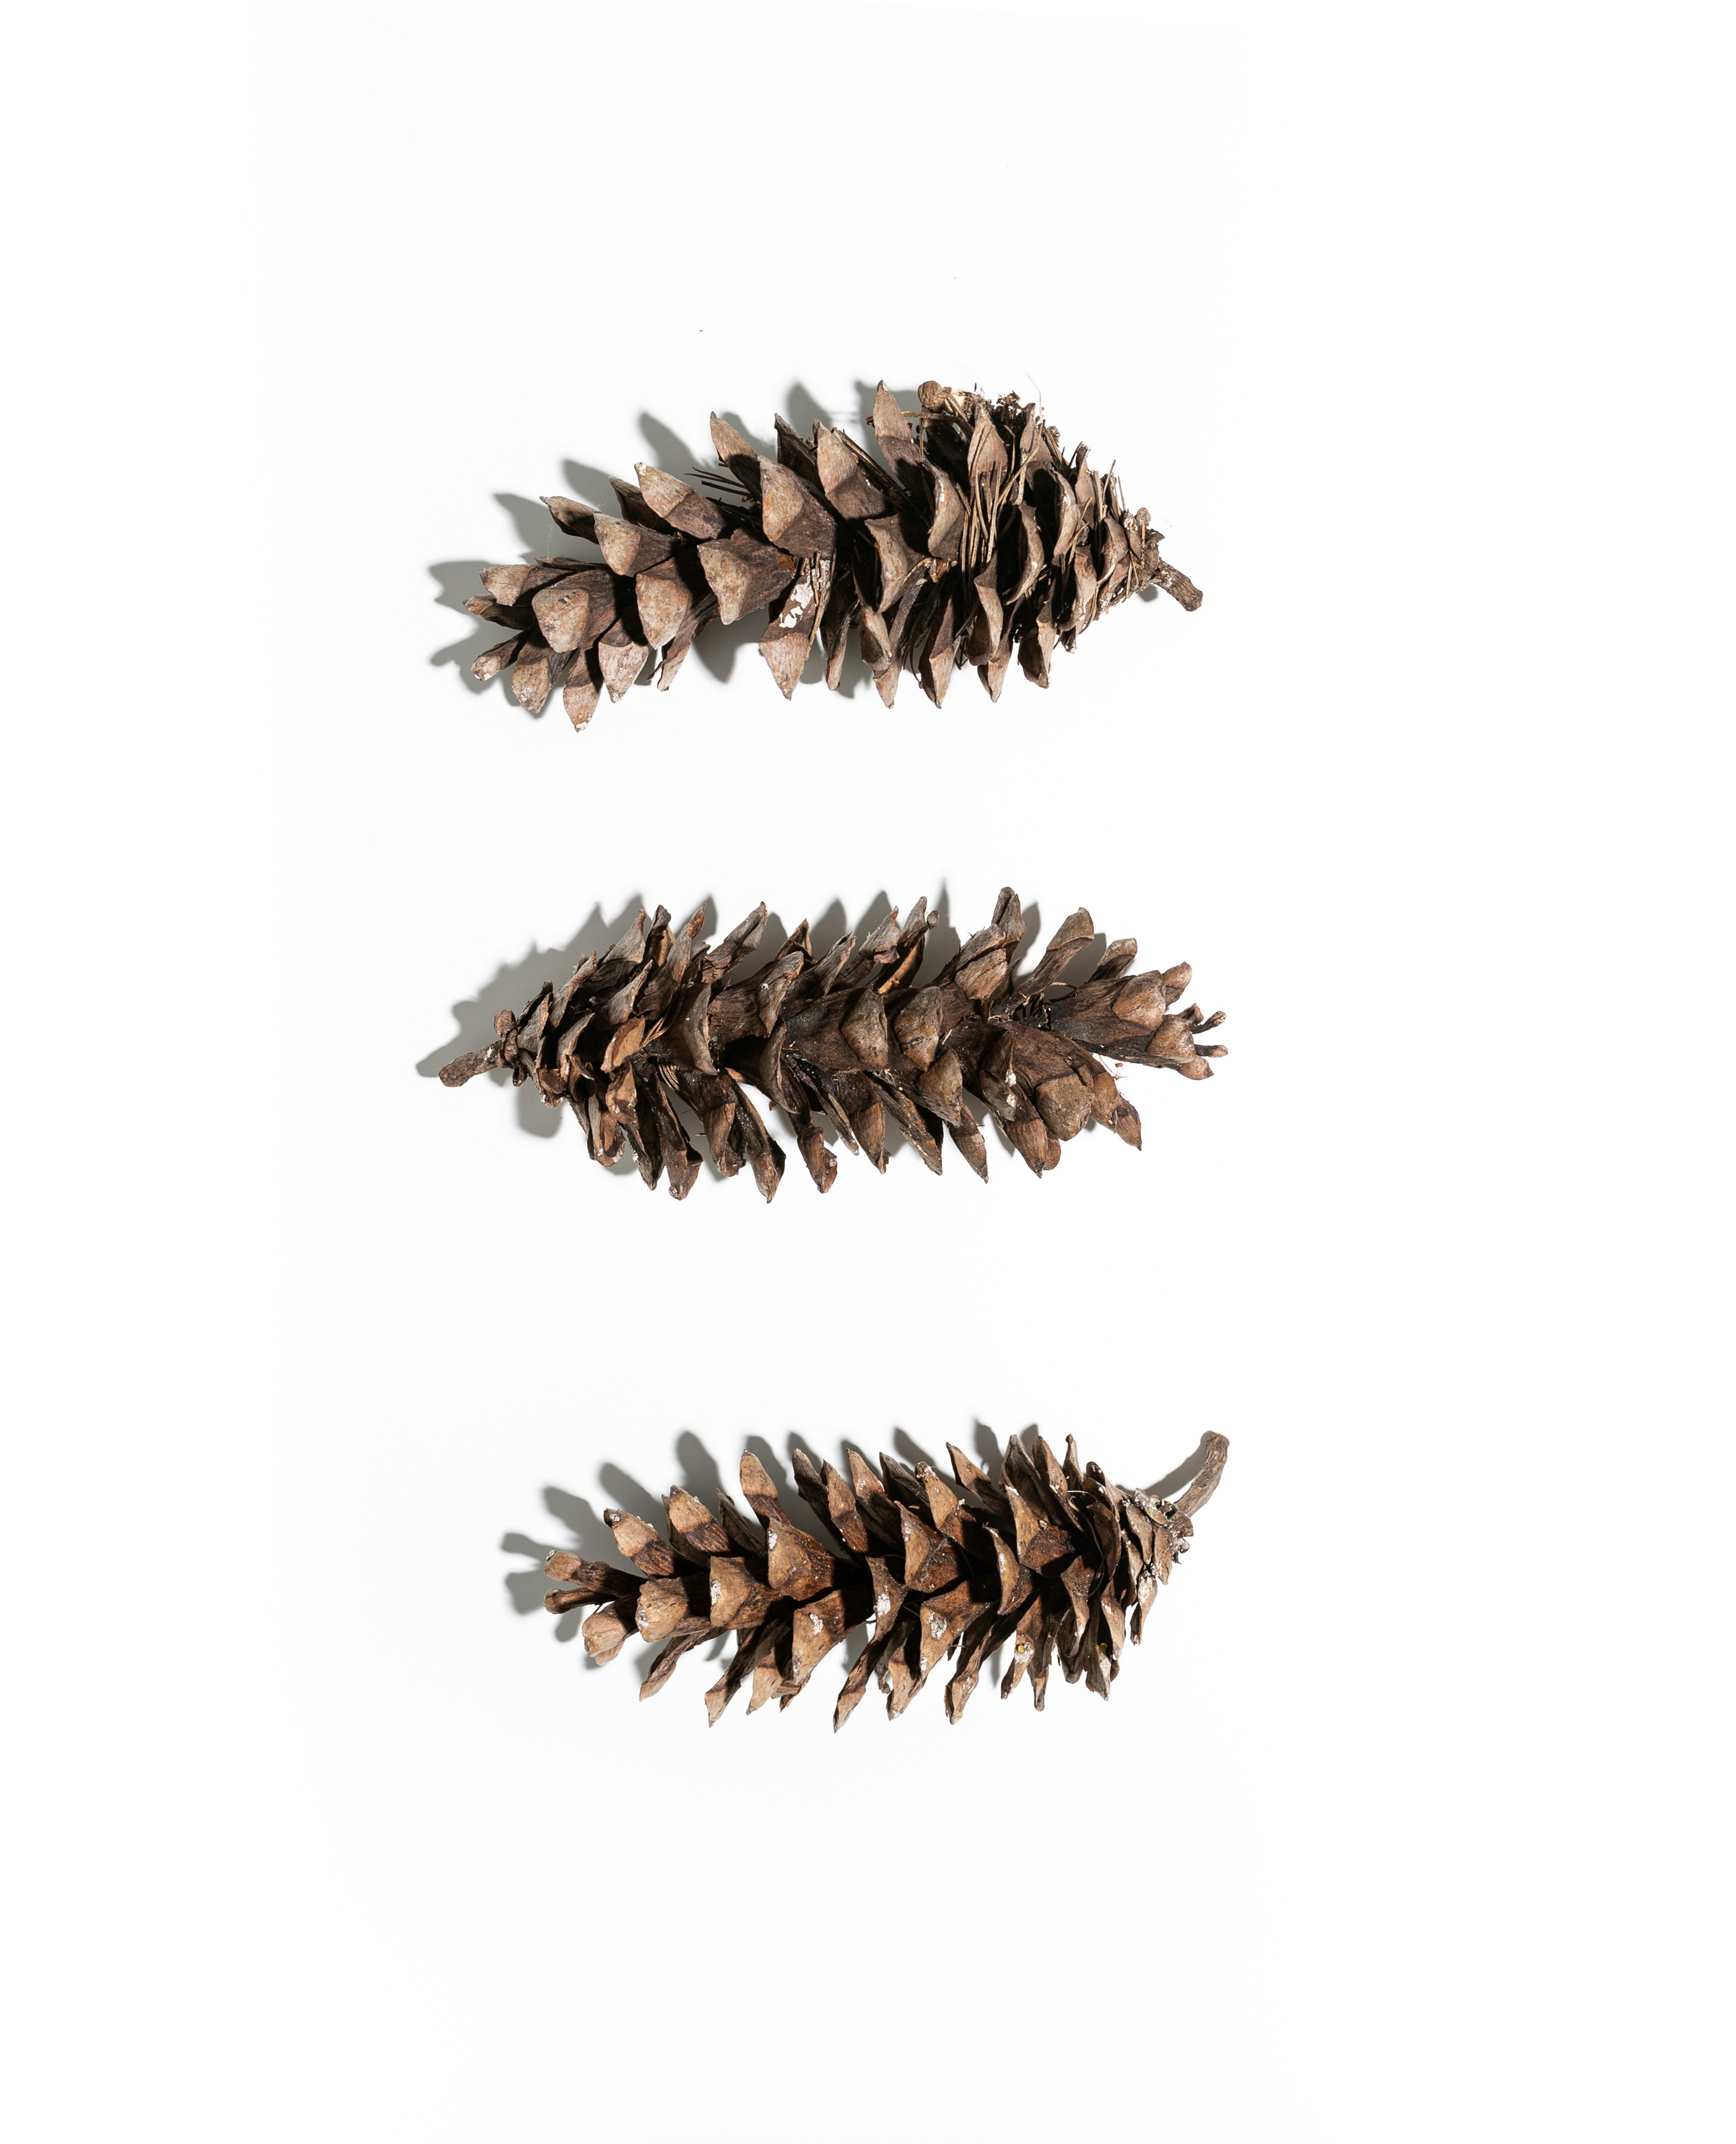 brown-pine-cone-on-white-background